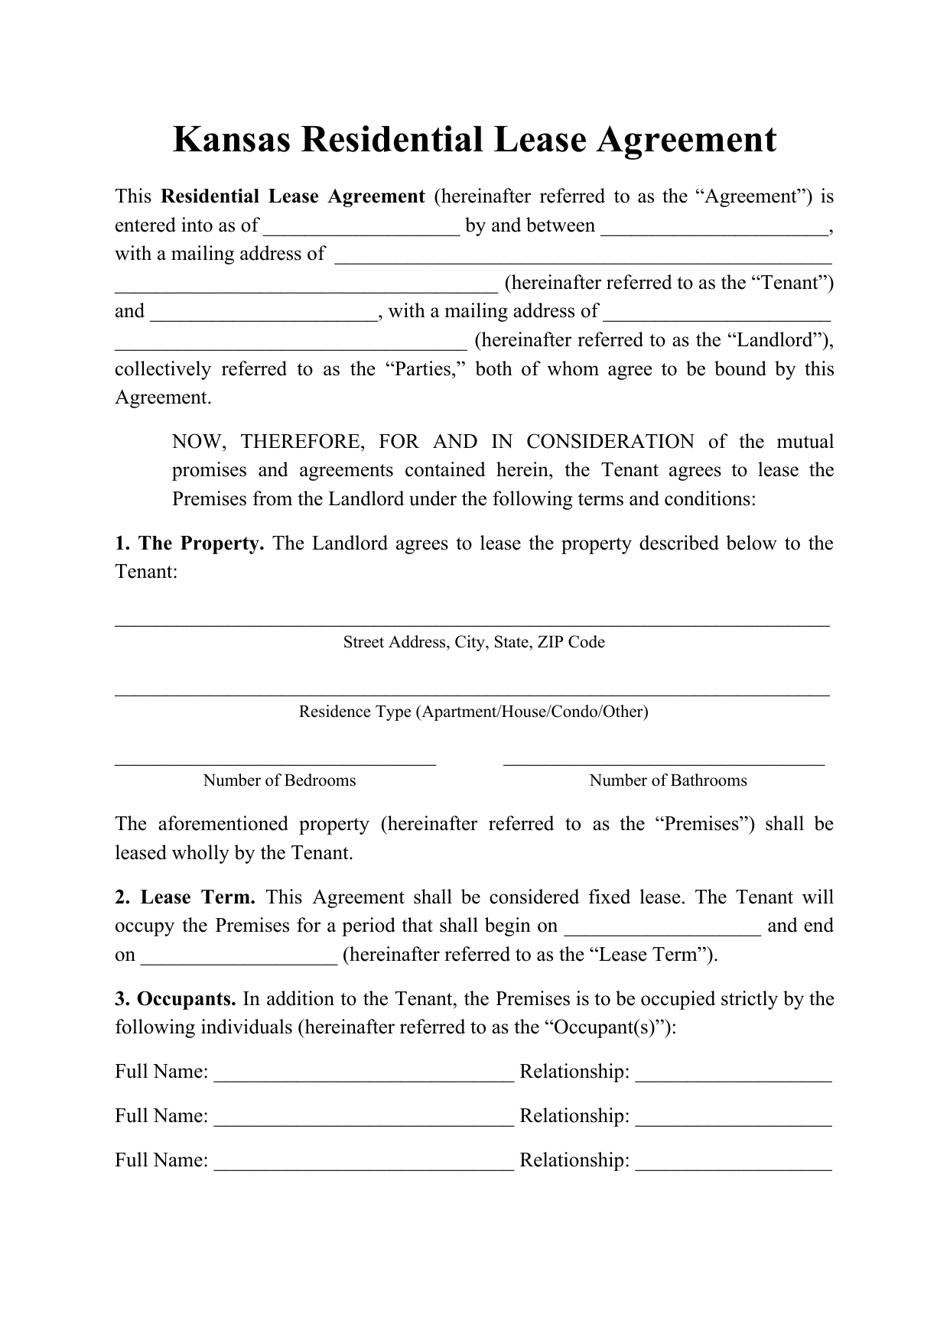 kansas-residential-lease-agreement-template-fill-out-sign-online-and